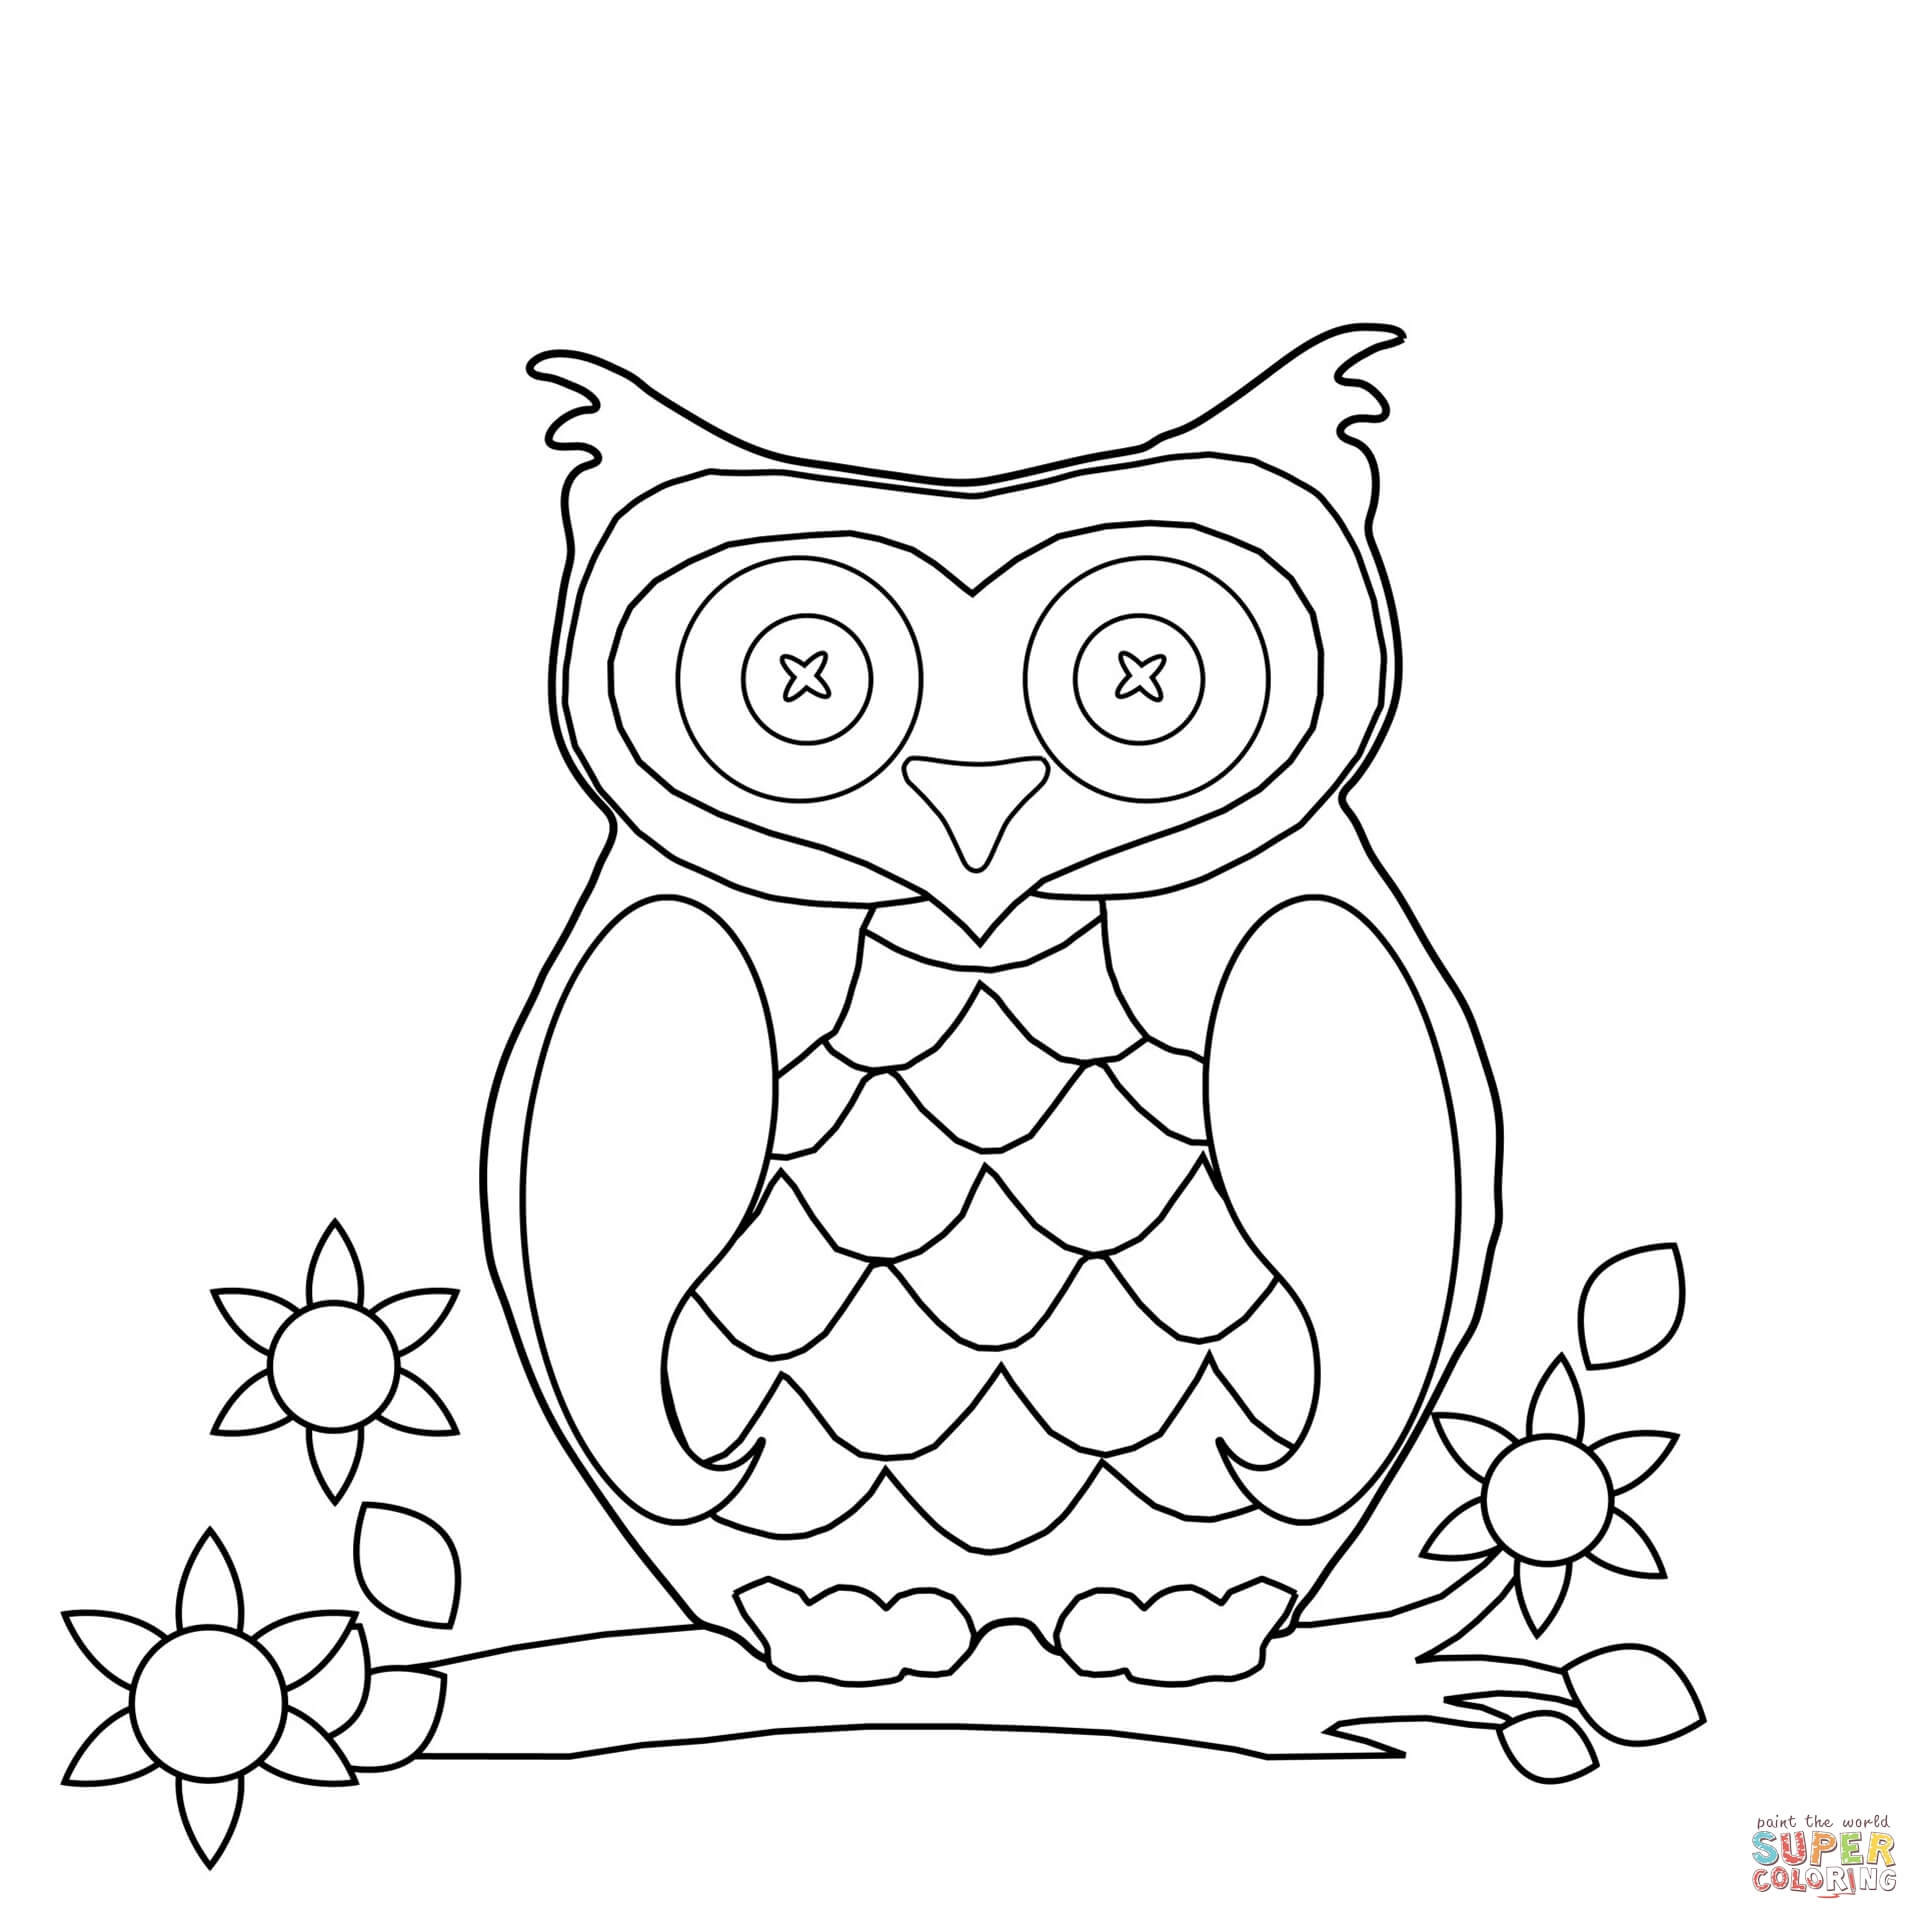 Free Printable Cartoon Coloring Pages
 Cartoon Owl coloring page